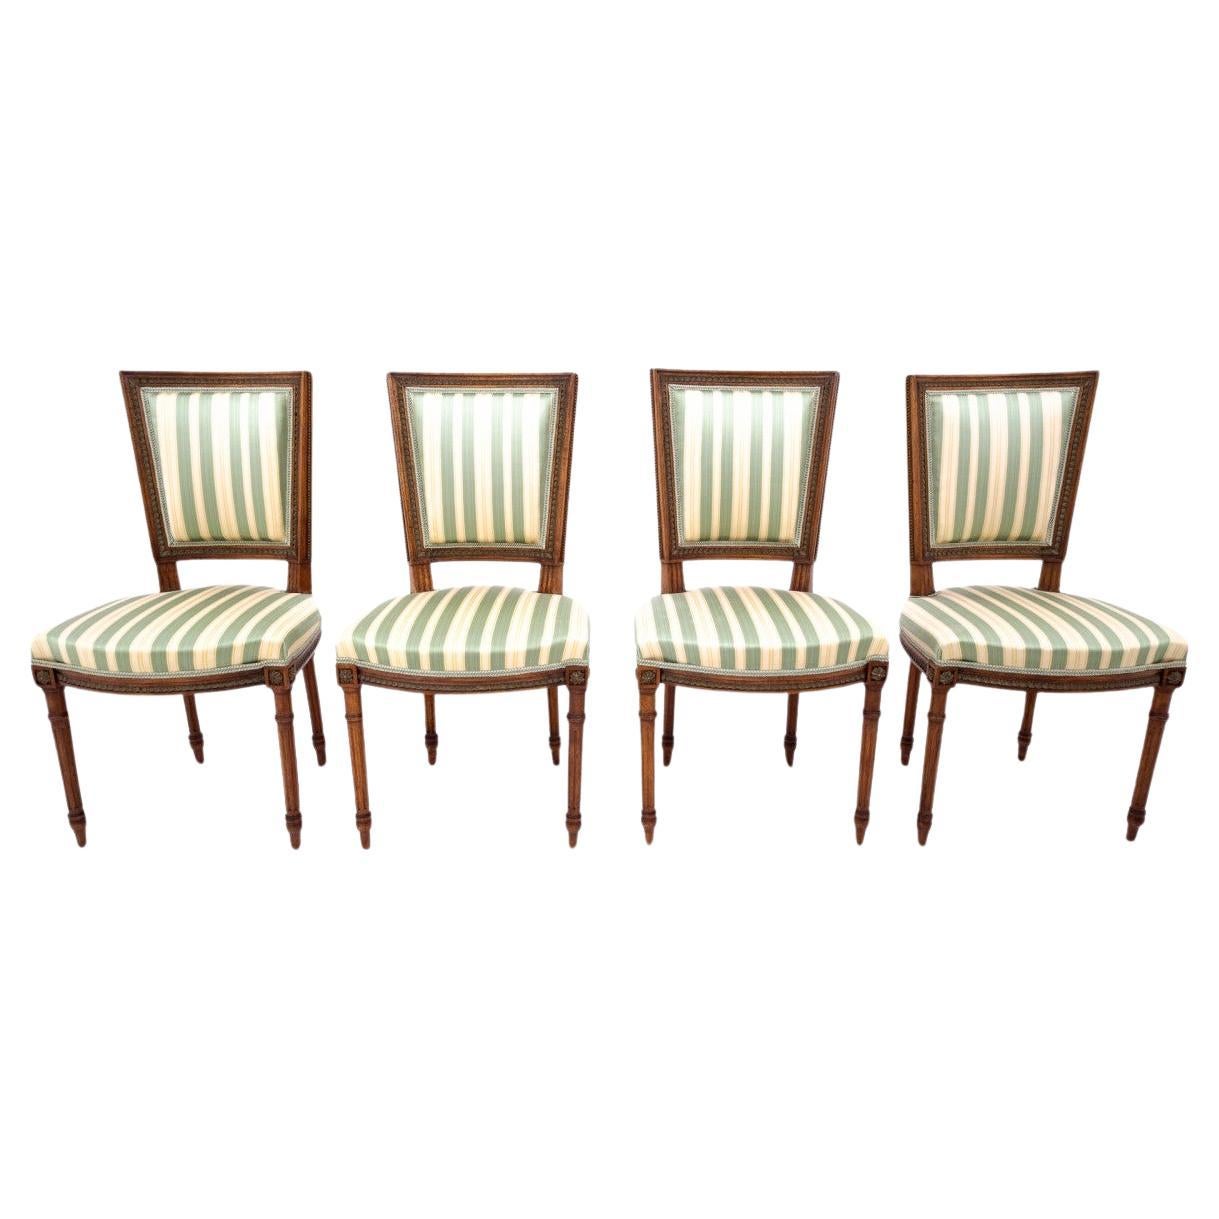 Set of 4 chairs, Sweden, circa 1870. For Sale